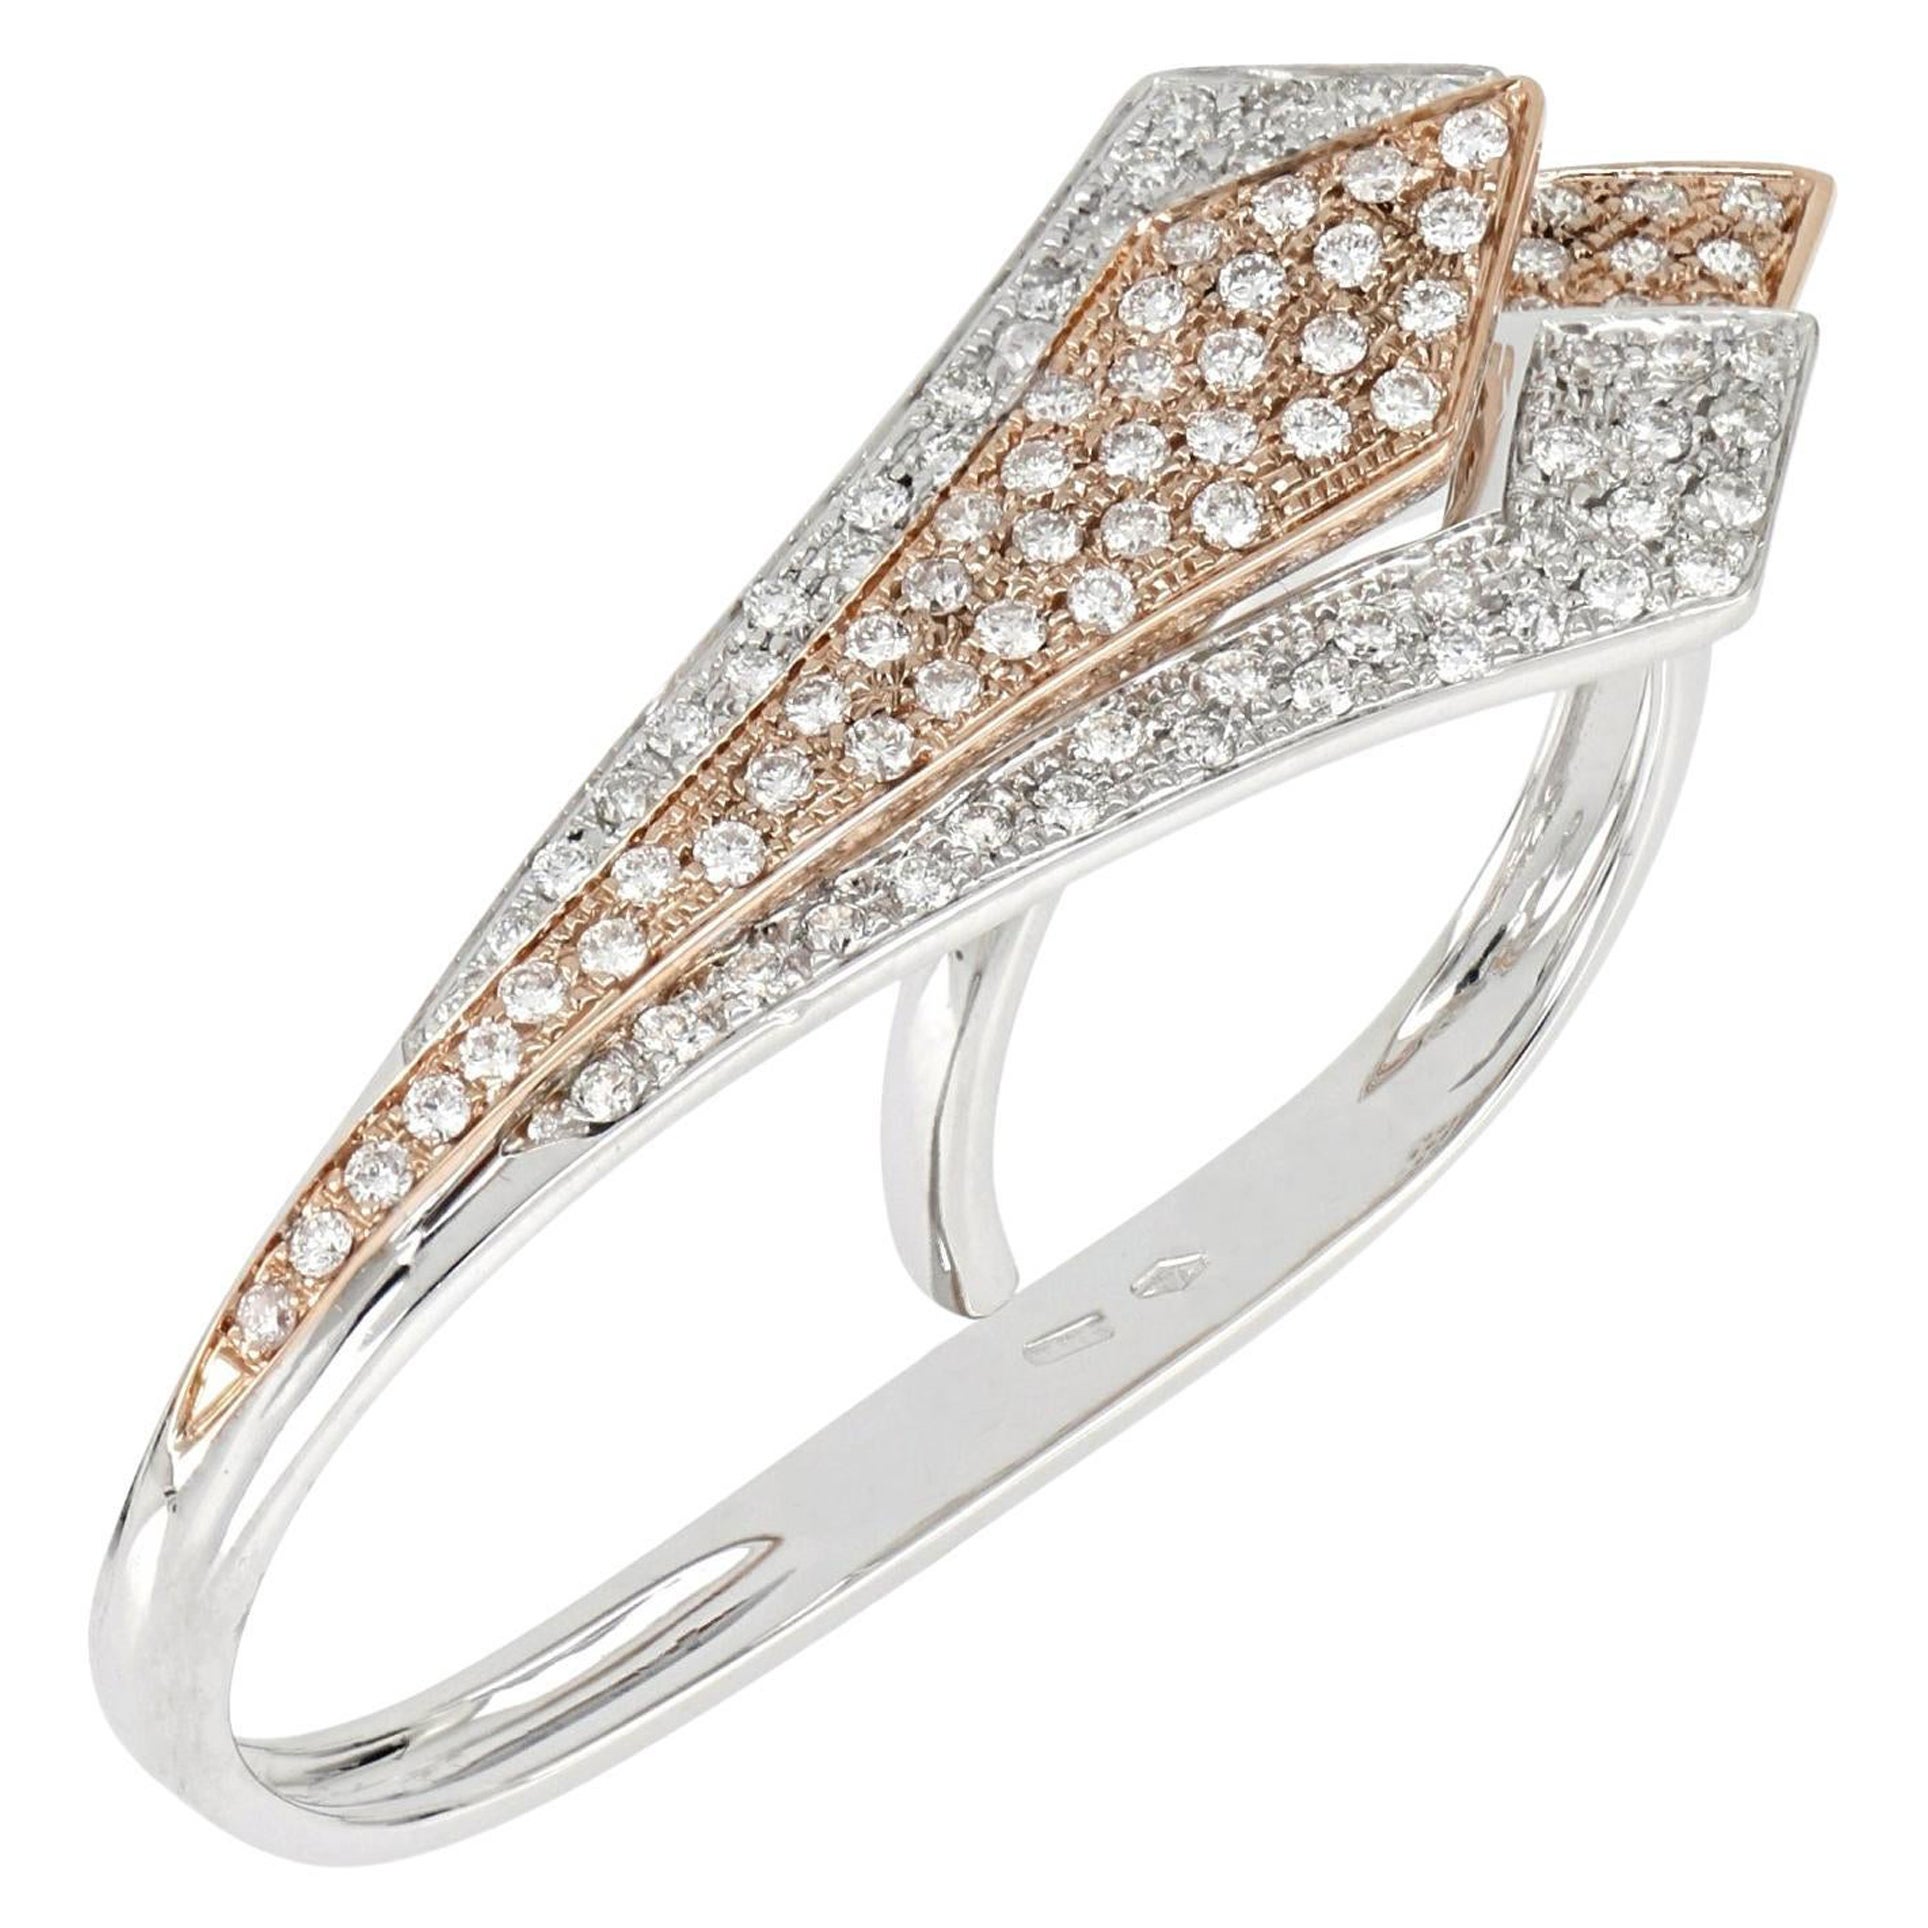 For Sale:  18kt White and Rose Gold Big 3 Chic Leaf Ring Enriched with Diamonds' Pavè